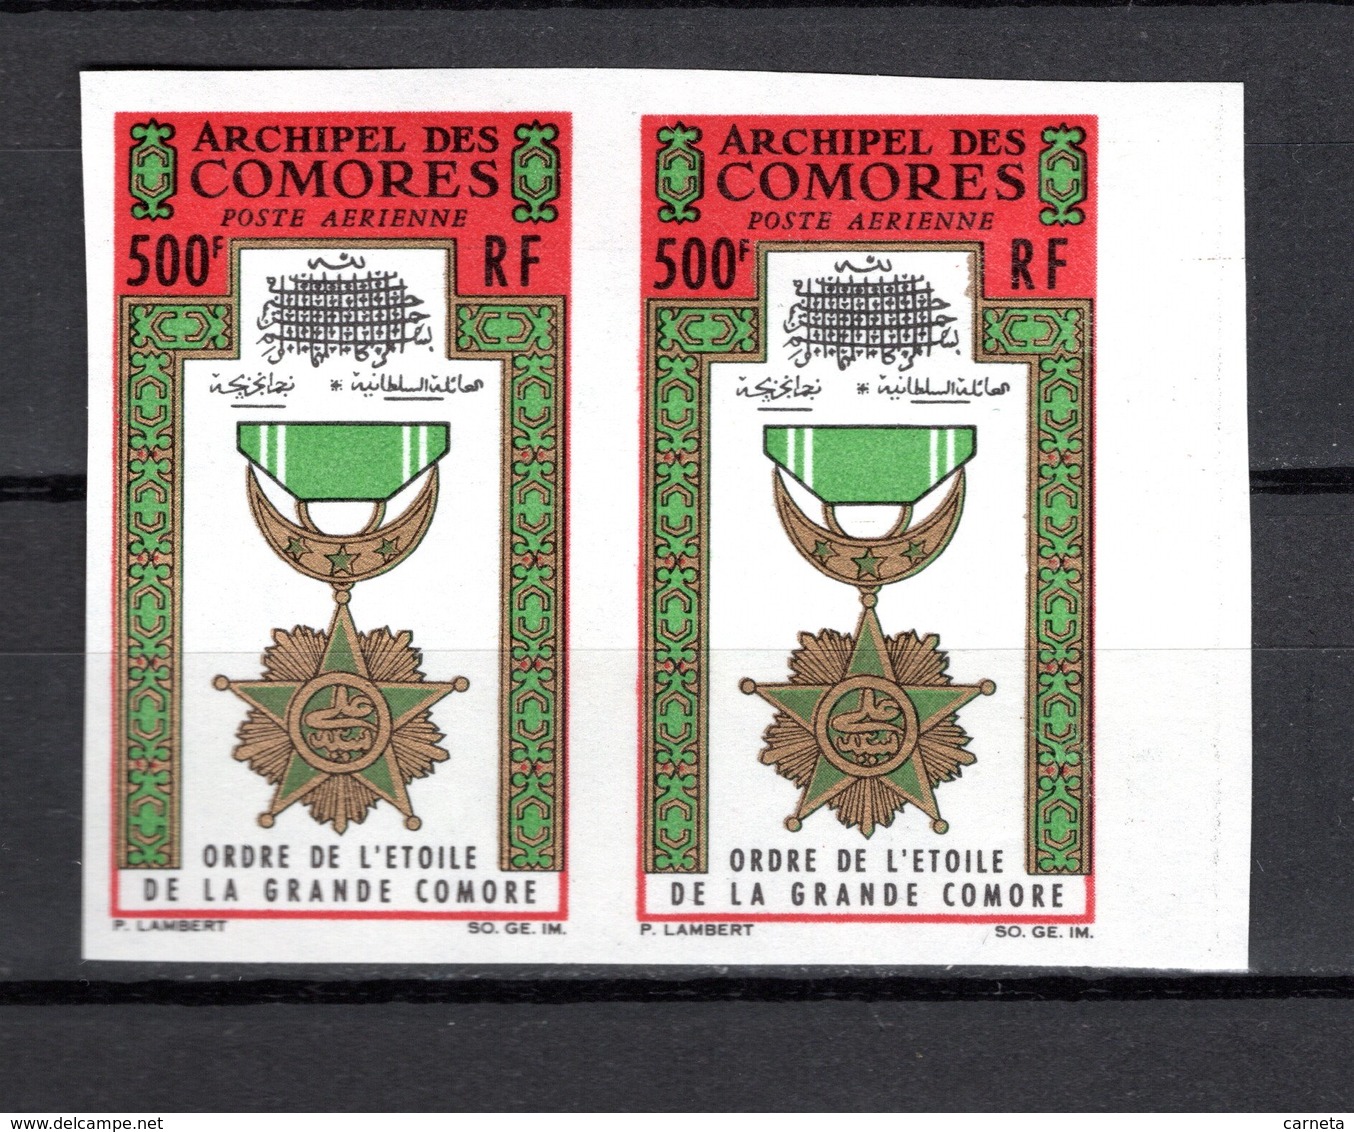 COMORES PA N° 13 PAIRE NON DENTELEE NEUF SANS CHARNIERE COTE 80.00€  ETOILE MEDAILLE - Luftpost